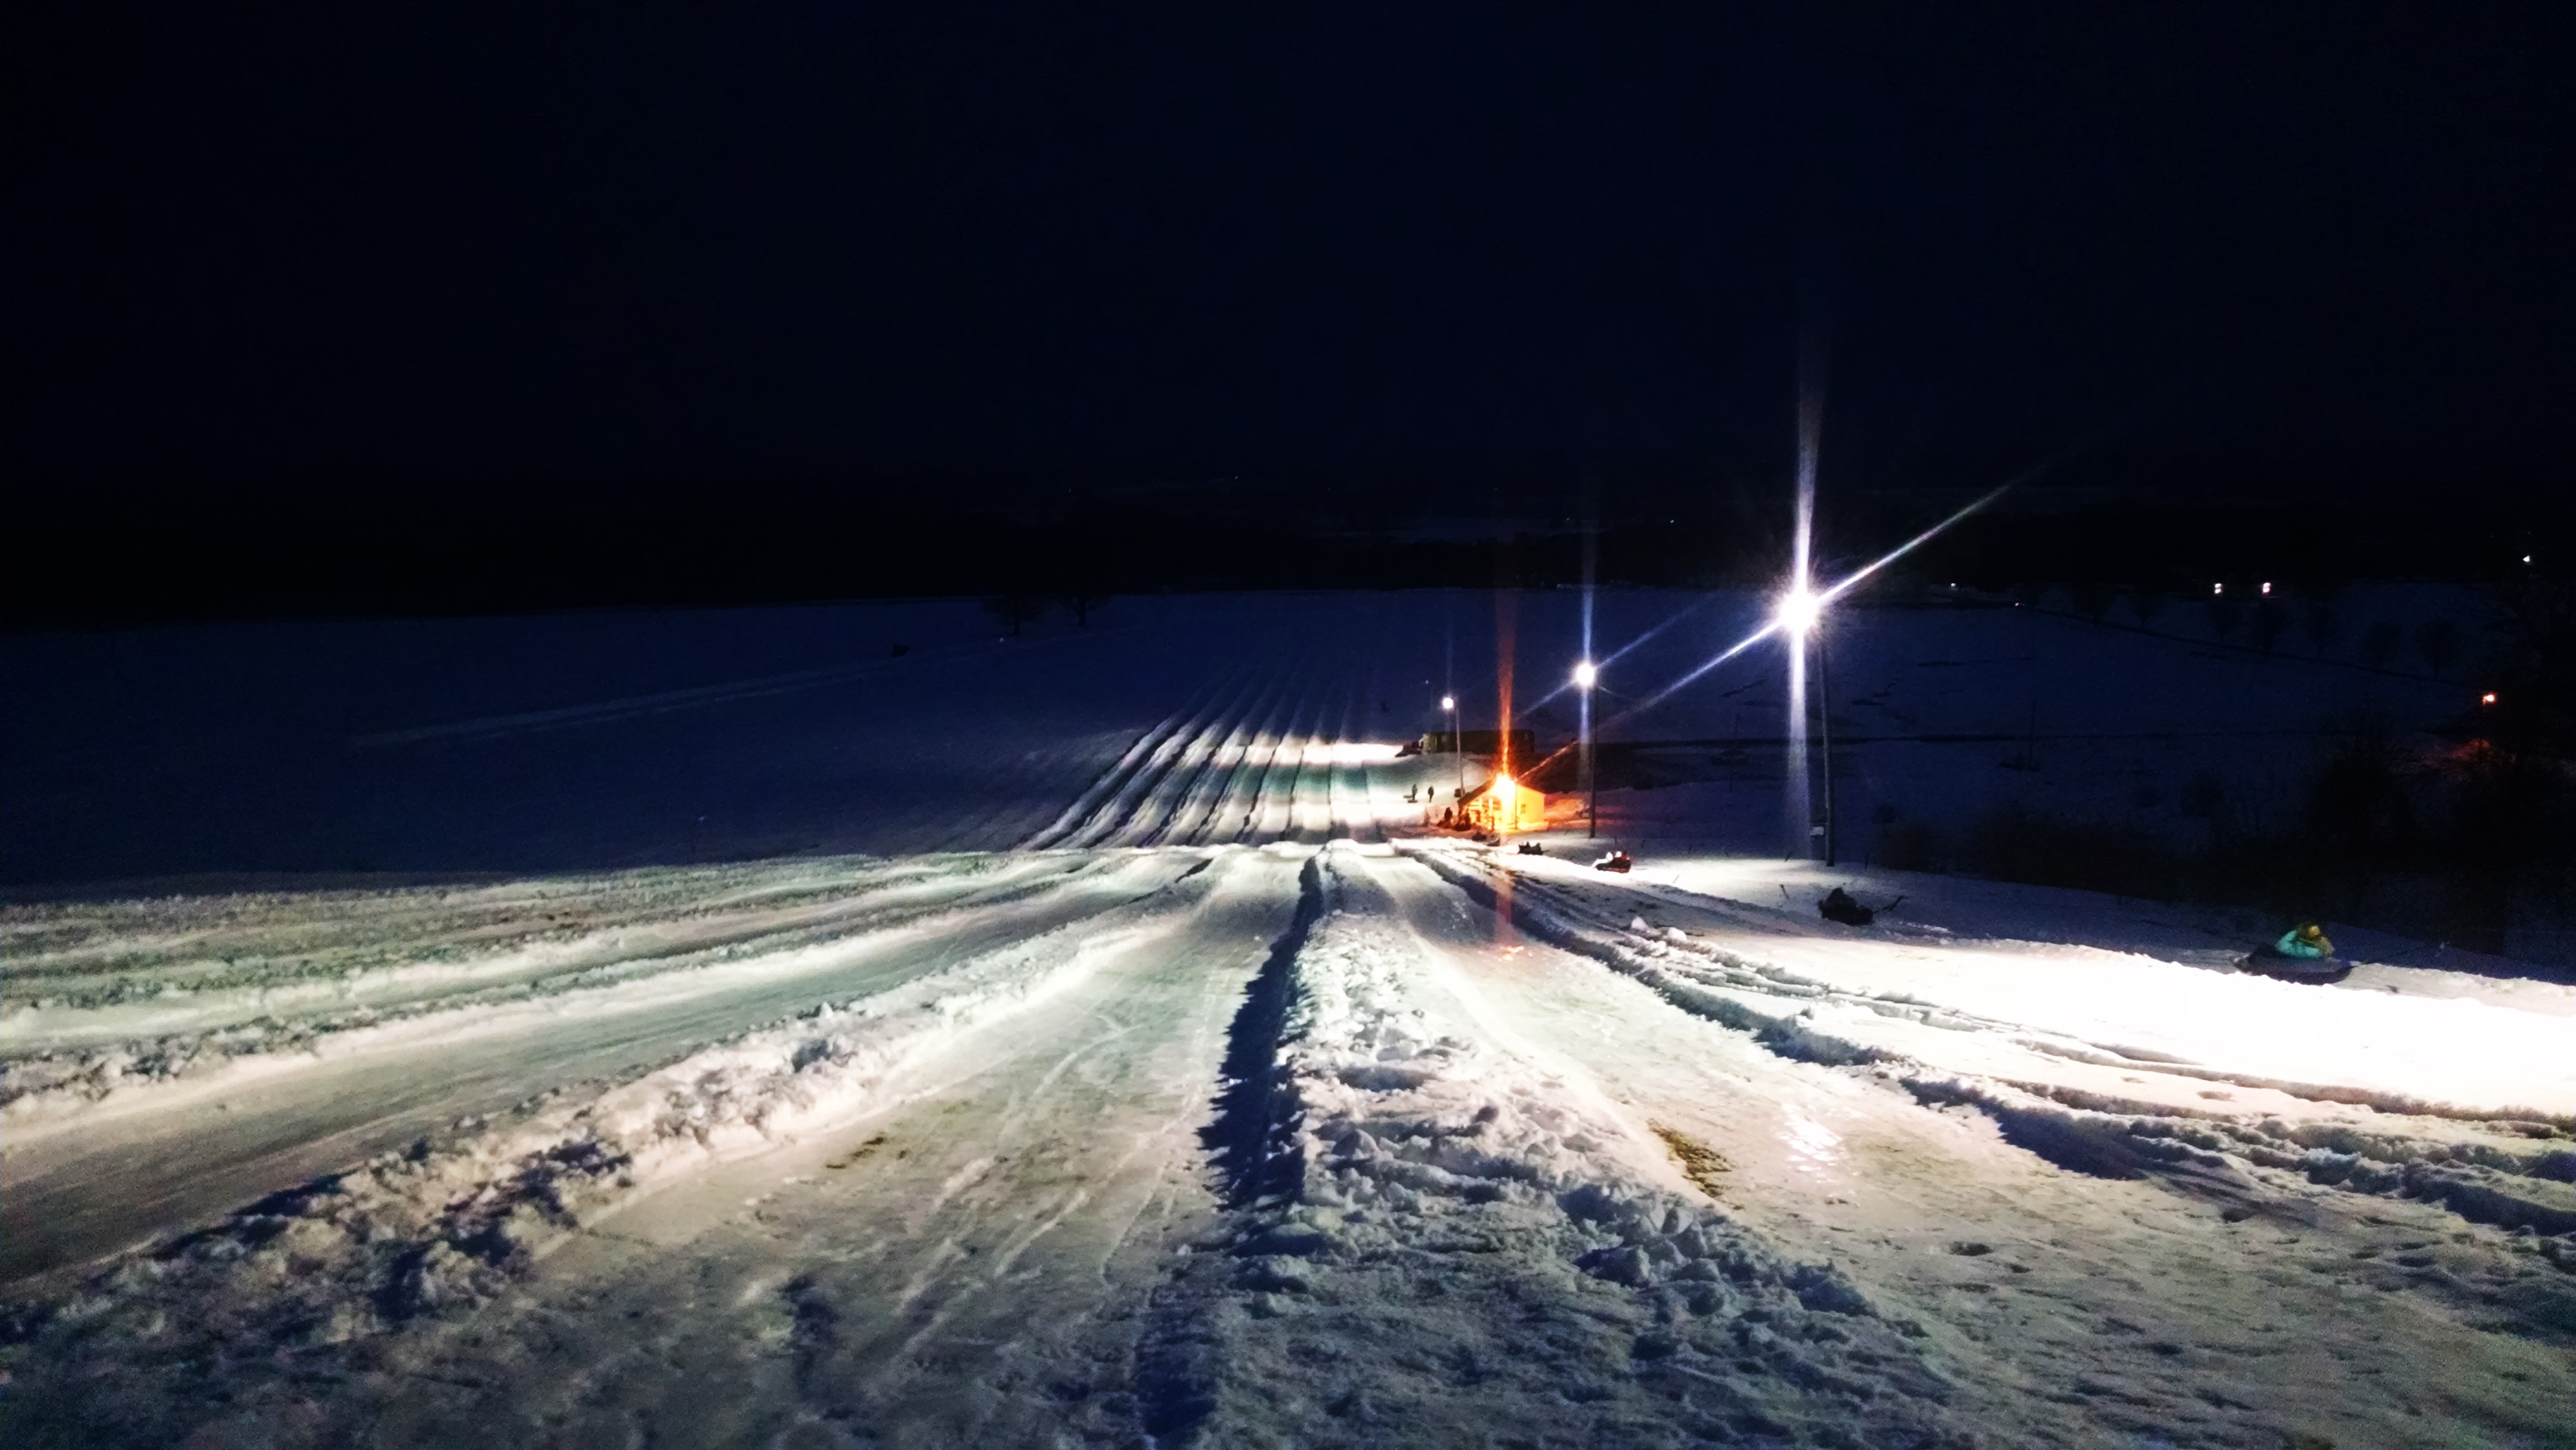 night tubing at Maple Ridge Center in Lowville NY